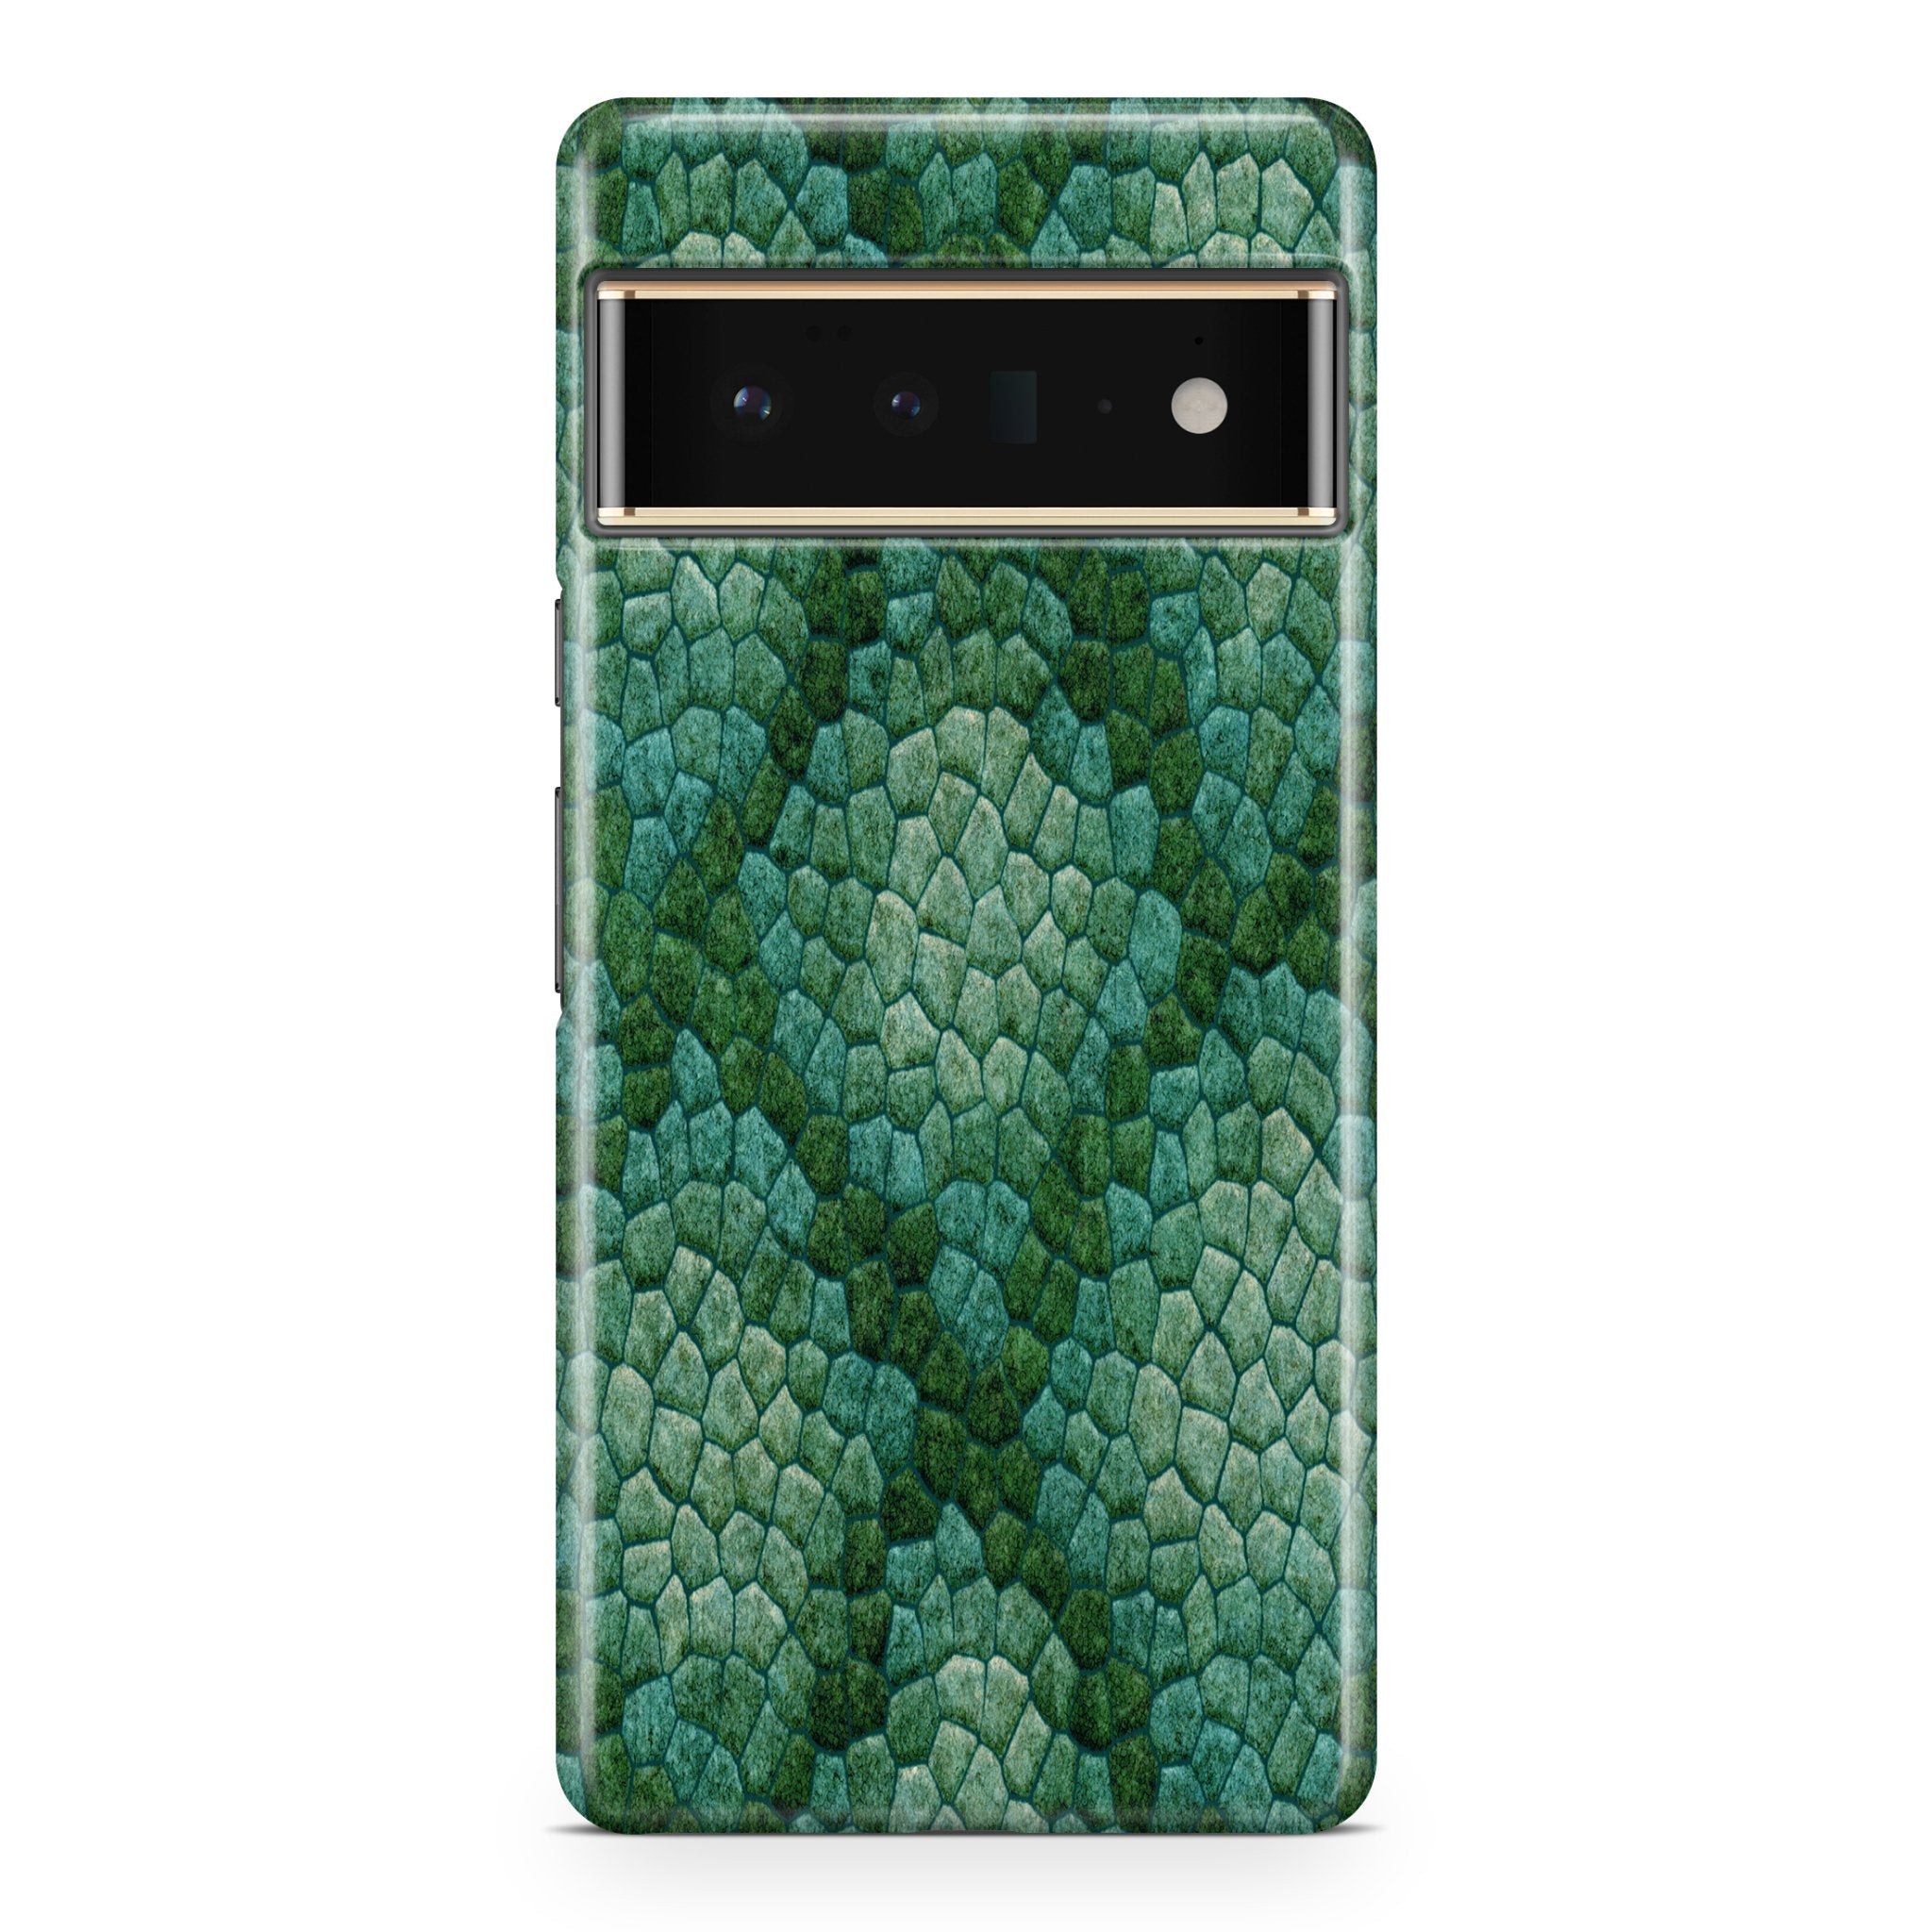 Snakeskin II - Google phone case designs by CaseSwagger